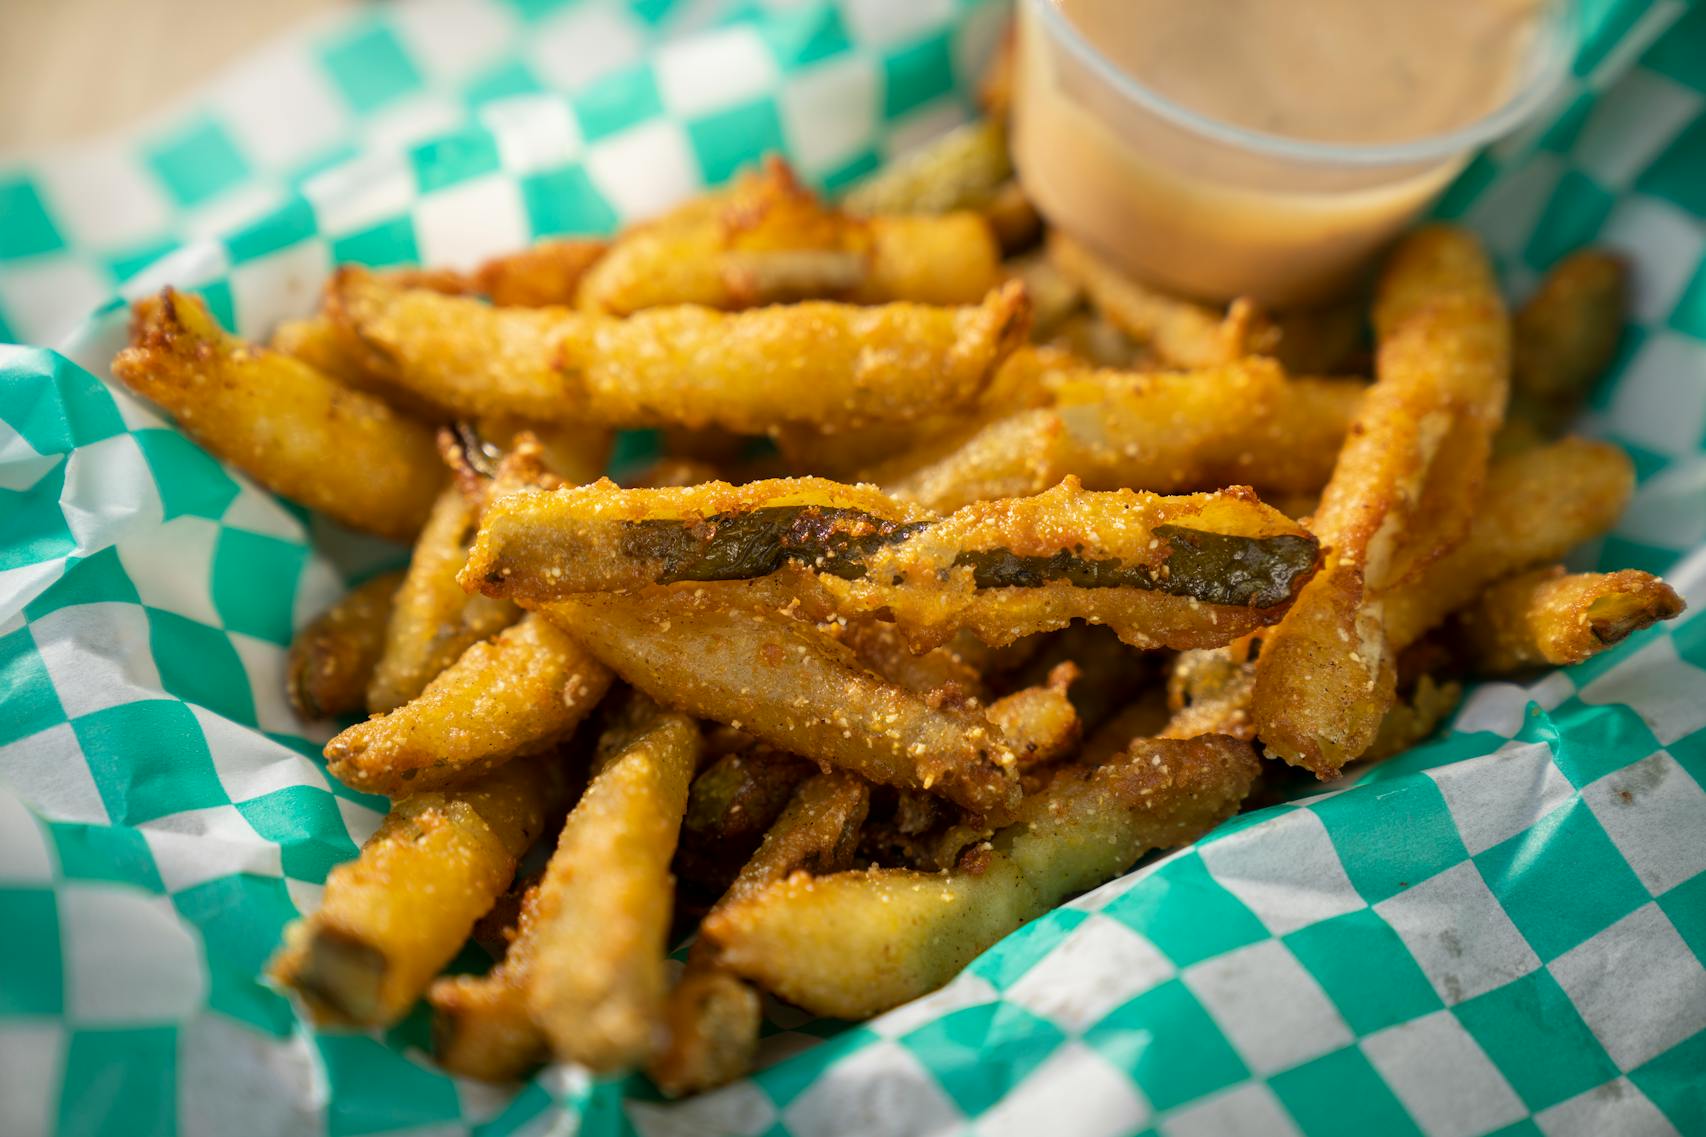 Pickle Fries from Mike’s Hamburgers. The new foods of the 2023 Minnesota State Fair photographed on the first day of the fair in Falcon Heights, Minn. on Tuesday, Aug. 8, 2023. ] LEILA NAVIDI • leila.navidi@startribune.com